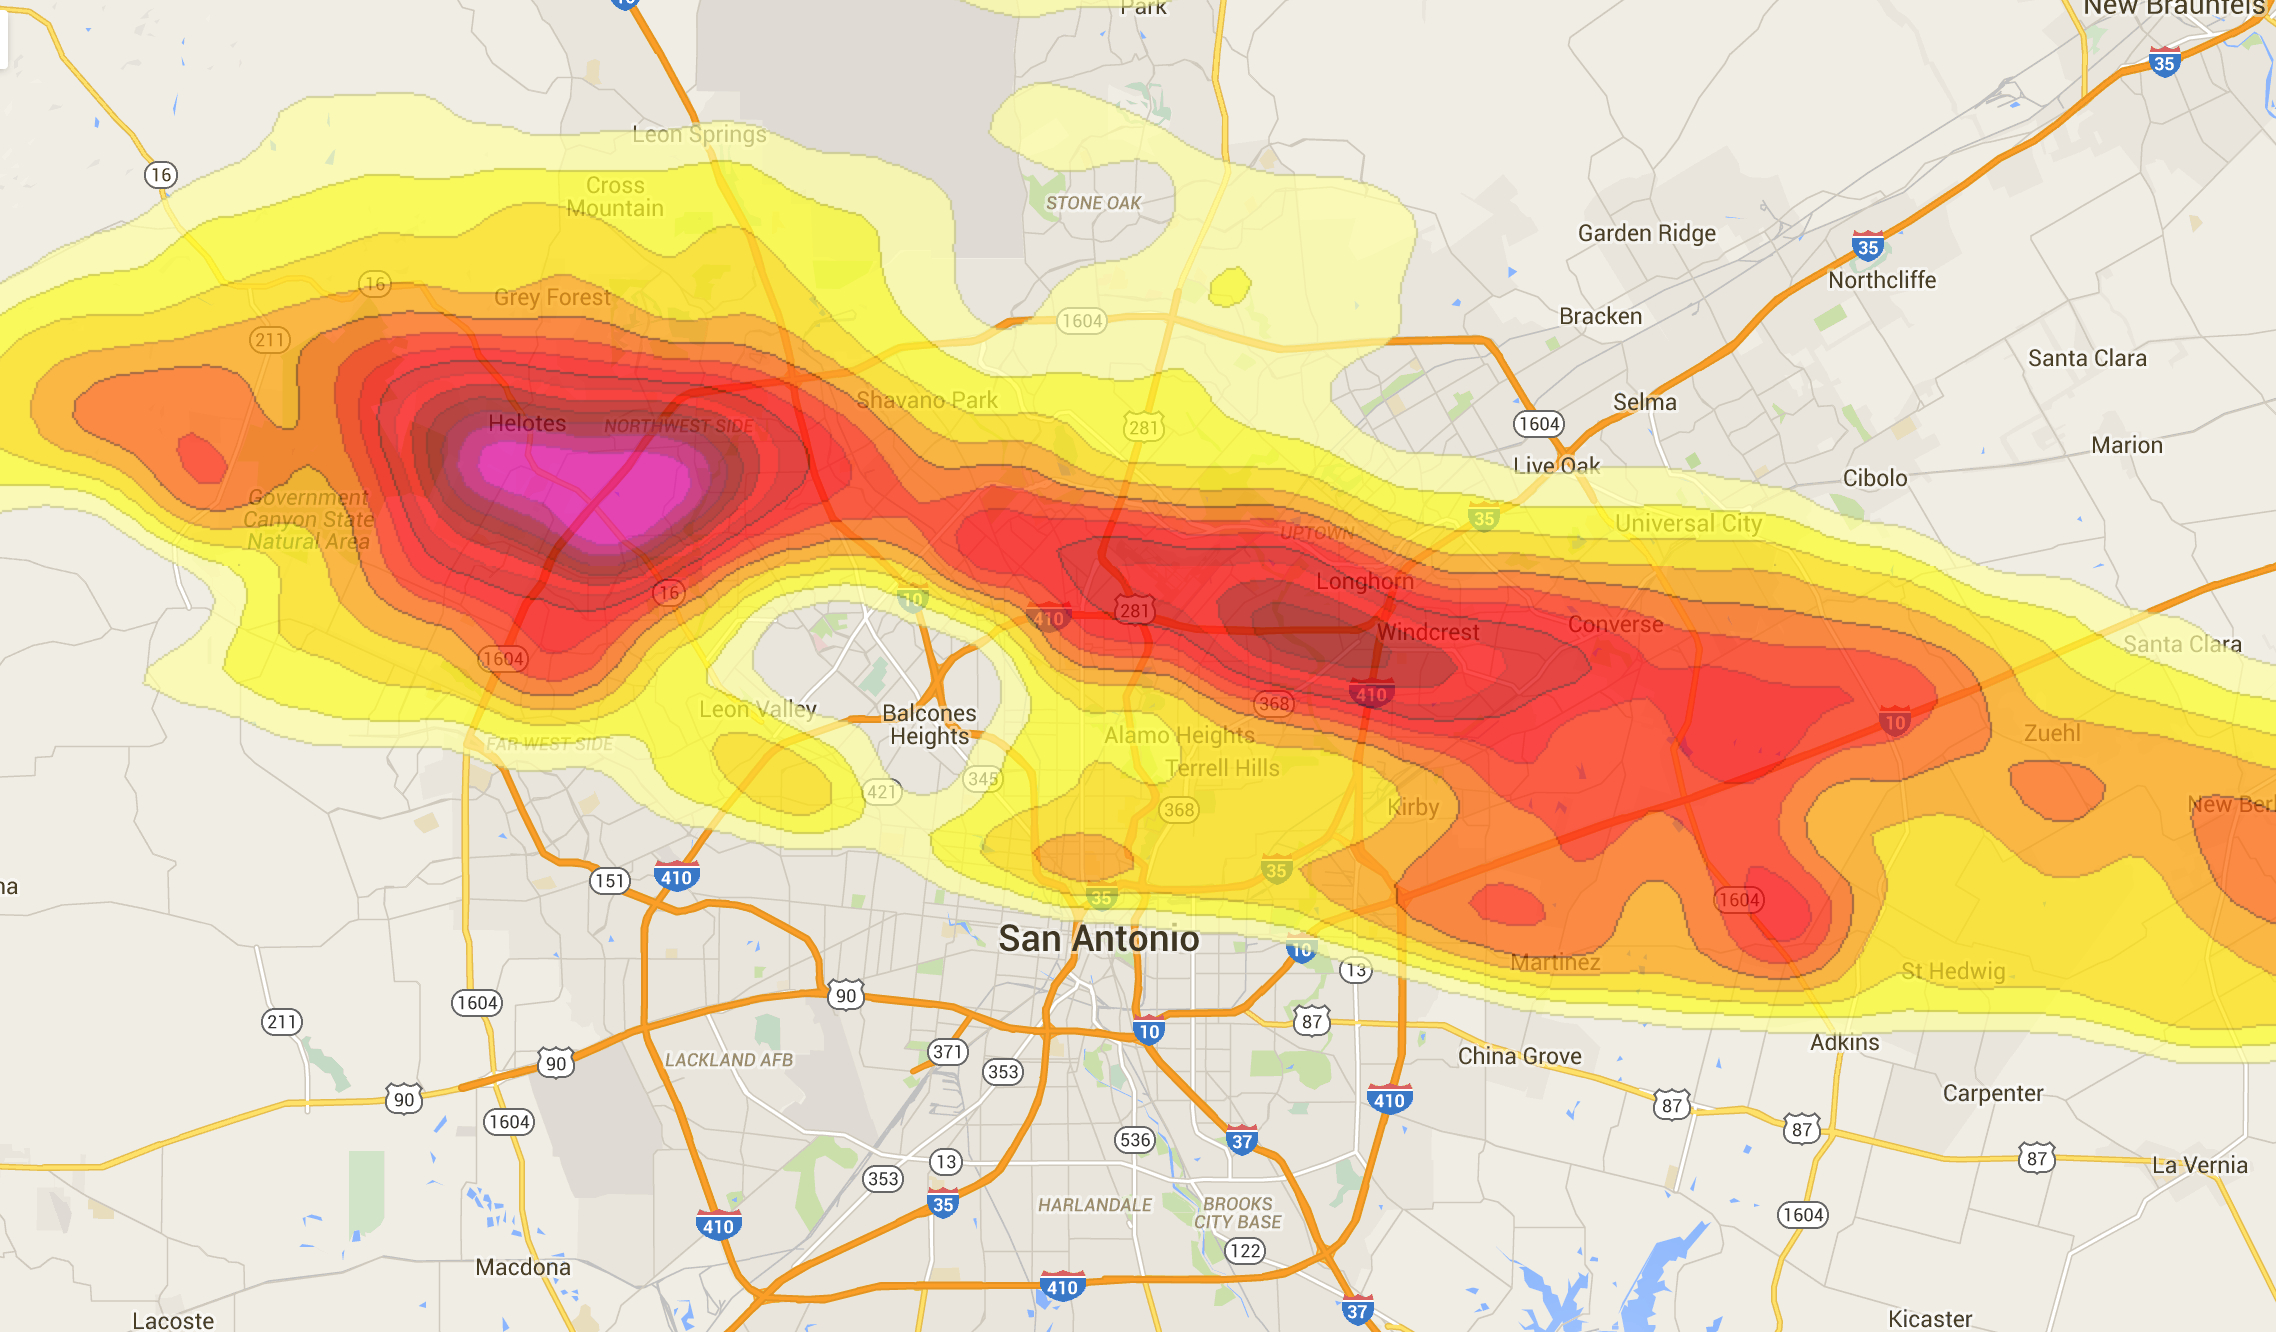 Storm Information And Maps | Claim Settlement | Commercial Claim Pro - Texas Hail Storm Map